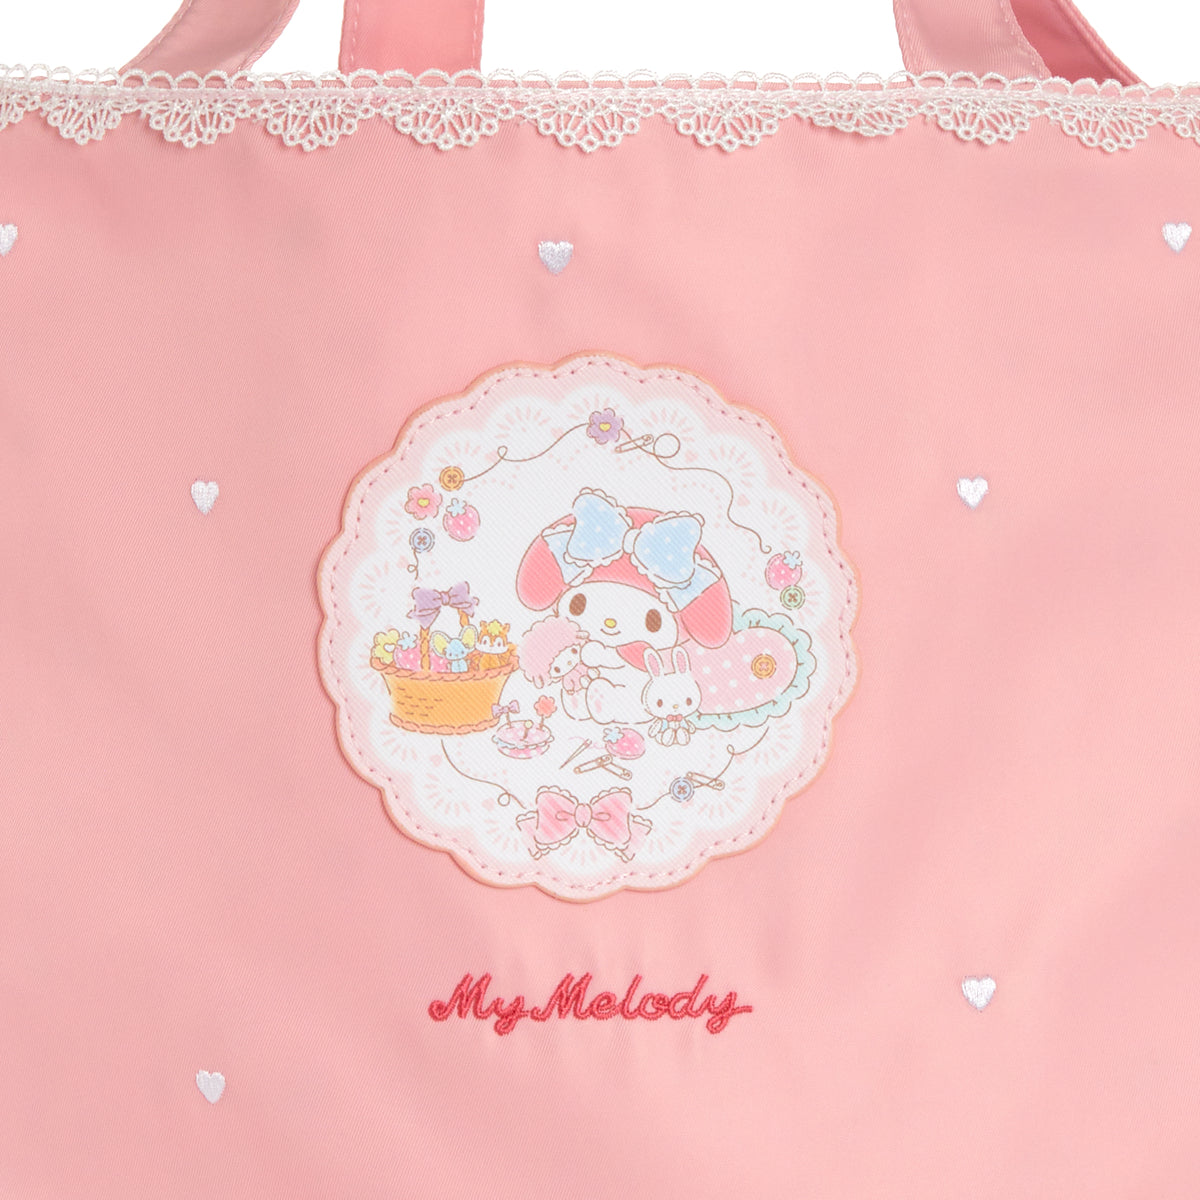 My Melody Tote Bag (Stitch and Lace Series) Bags Global Original   